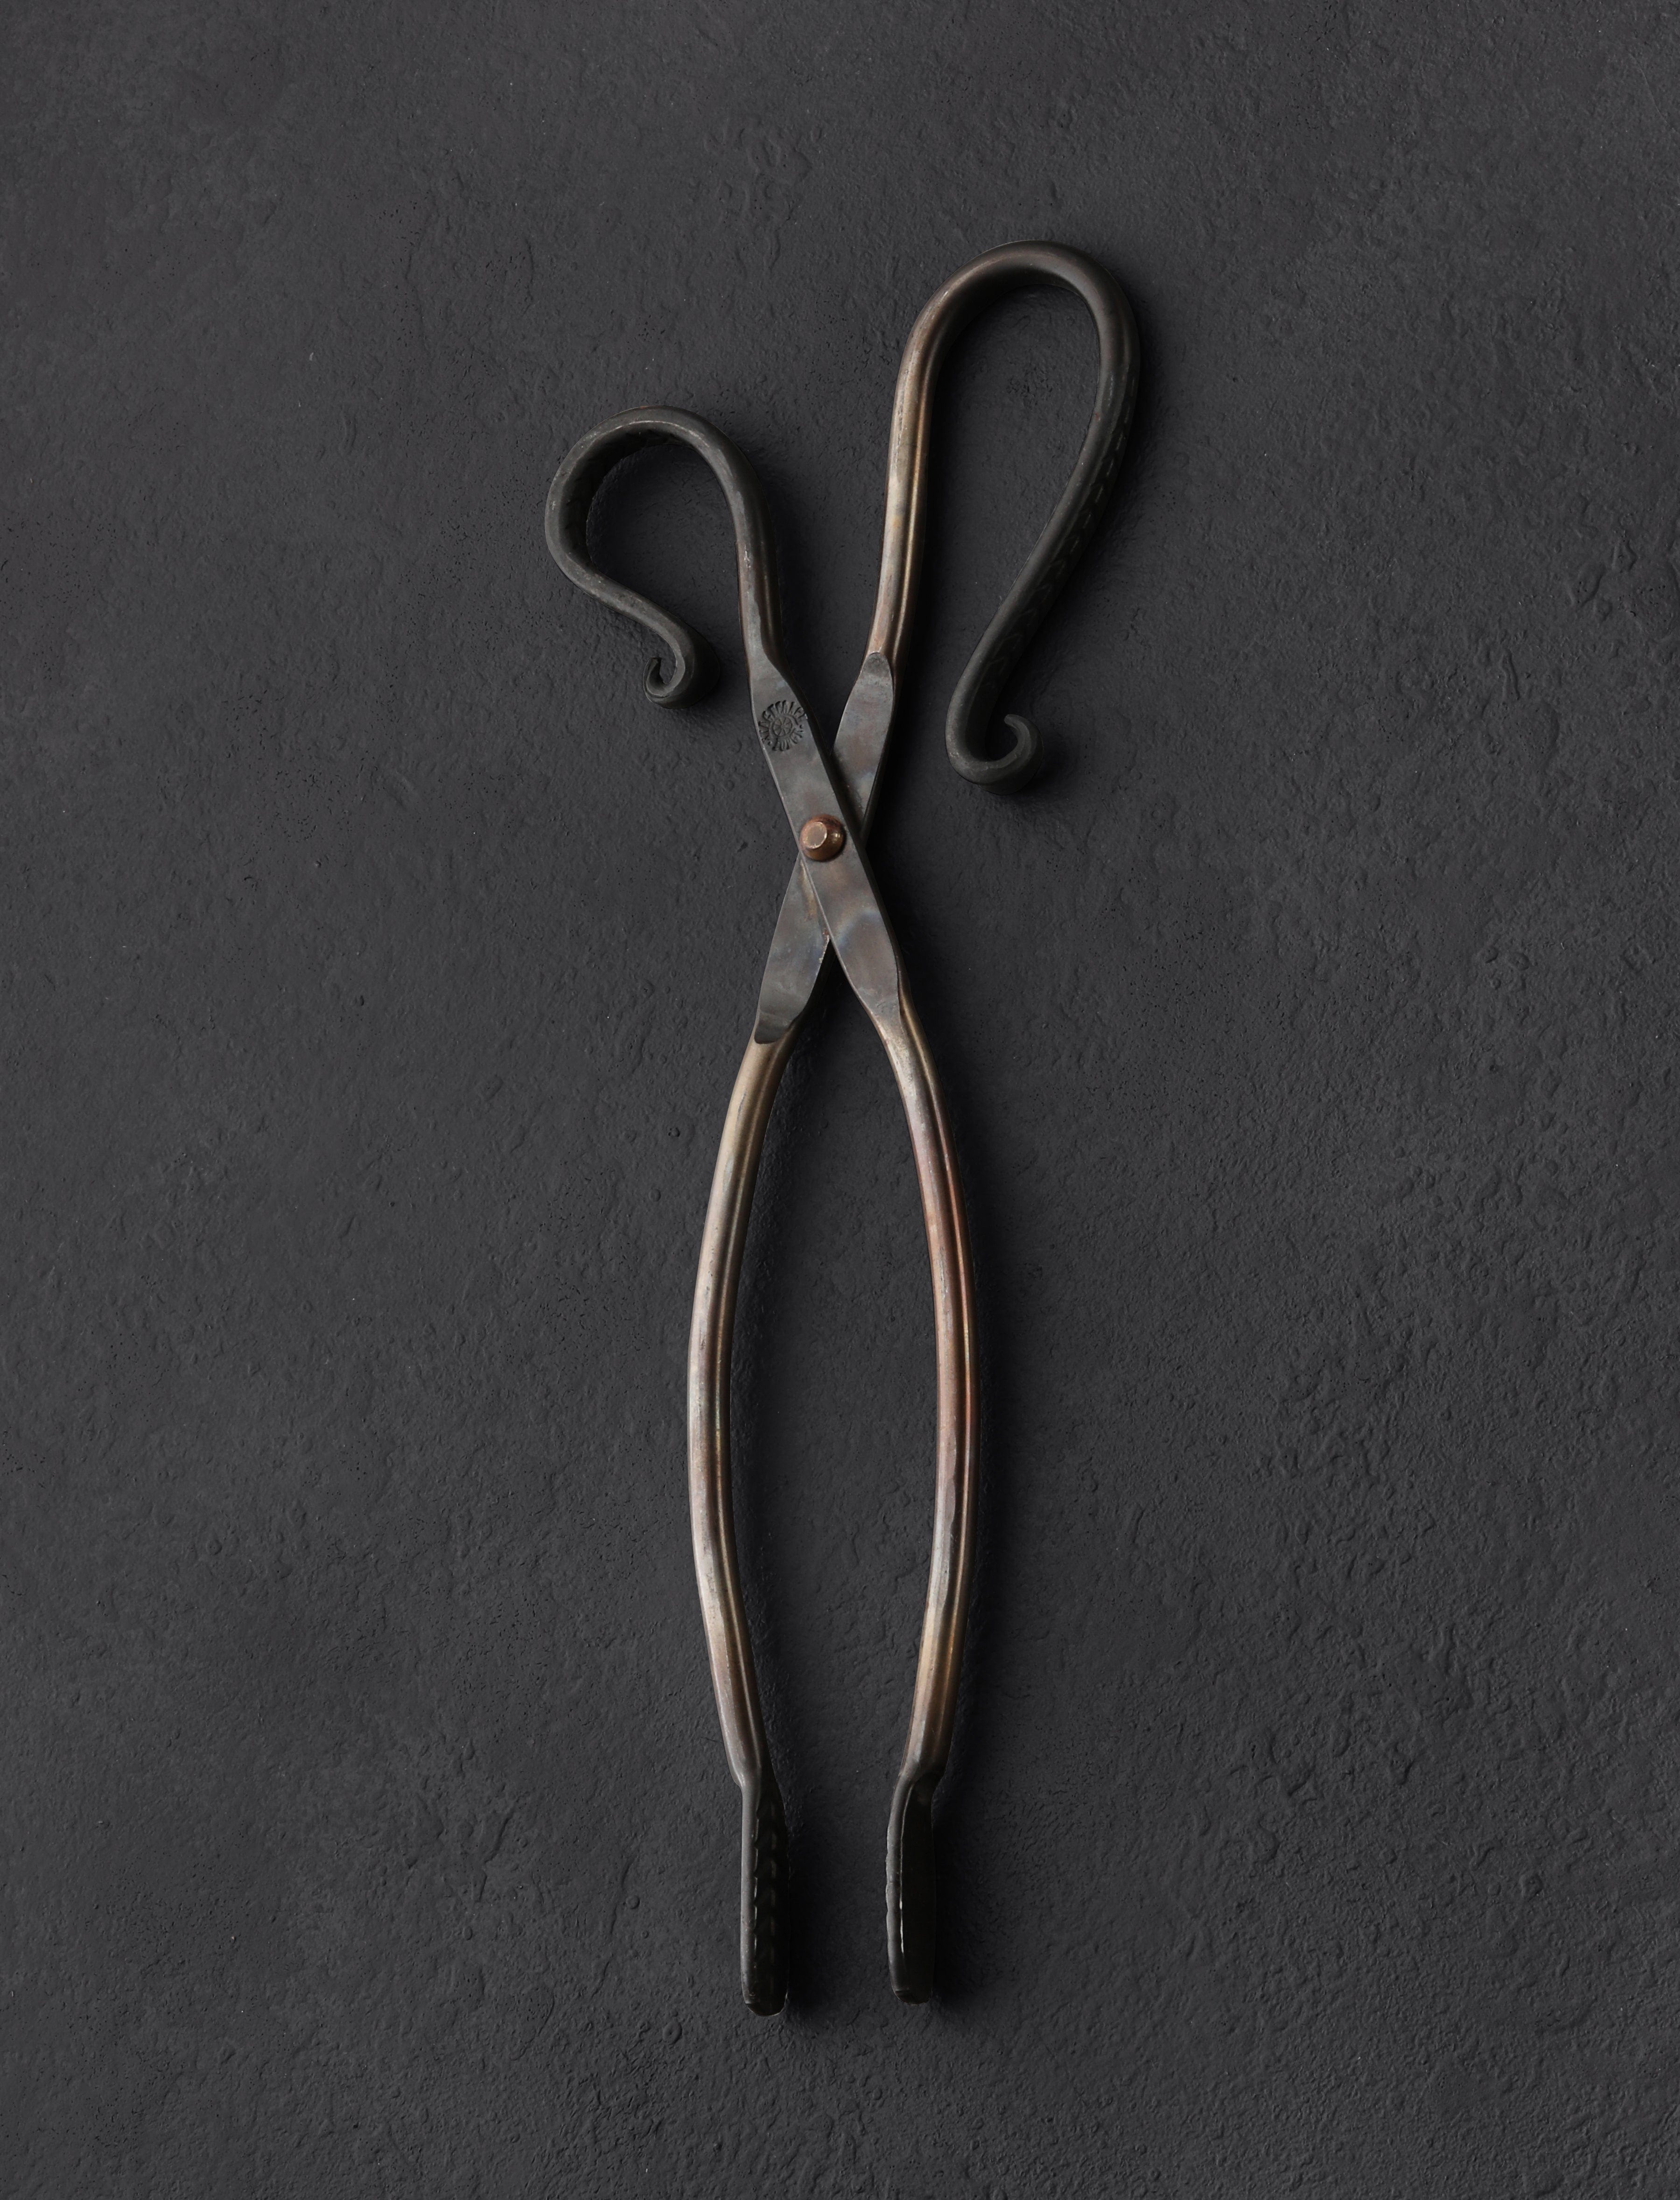 http://eatingtools.com/cdn/shop/files/tongs-stage-coach-forge-oregon-forged-silver-chef-tongs-43020213354771.jpg?v=1693345522